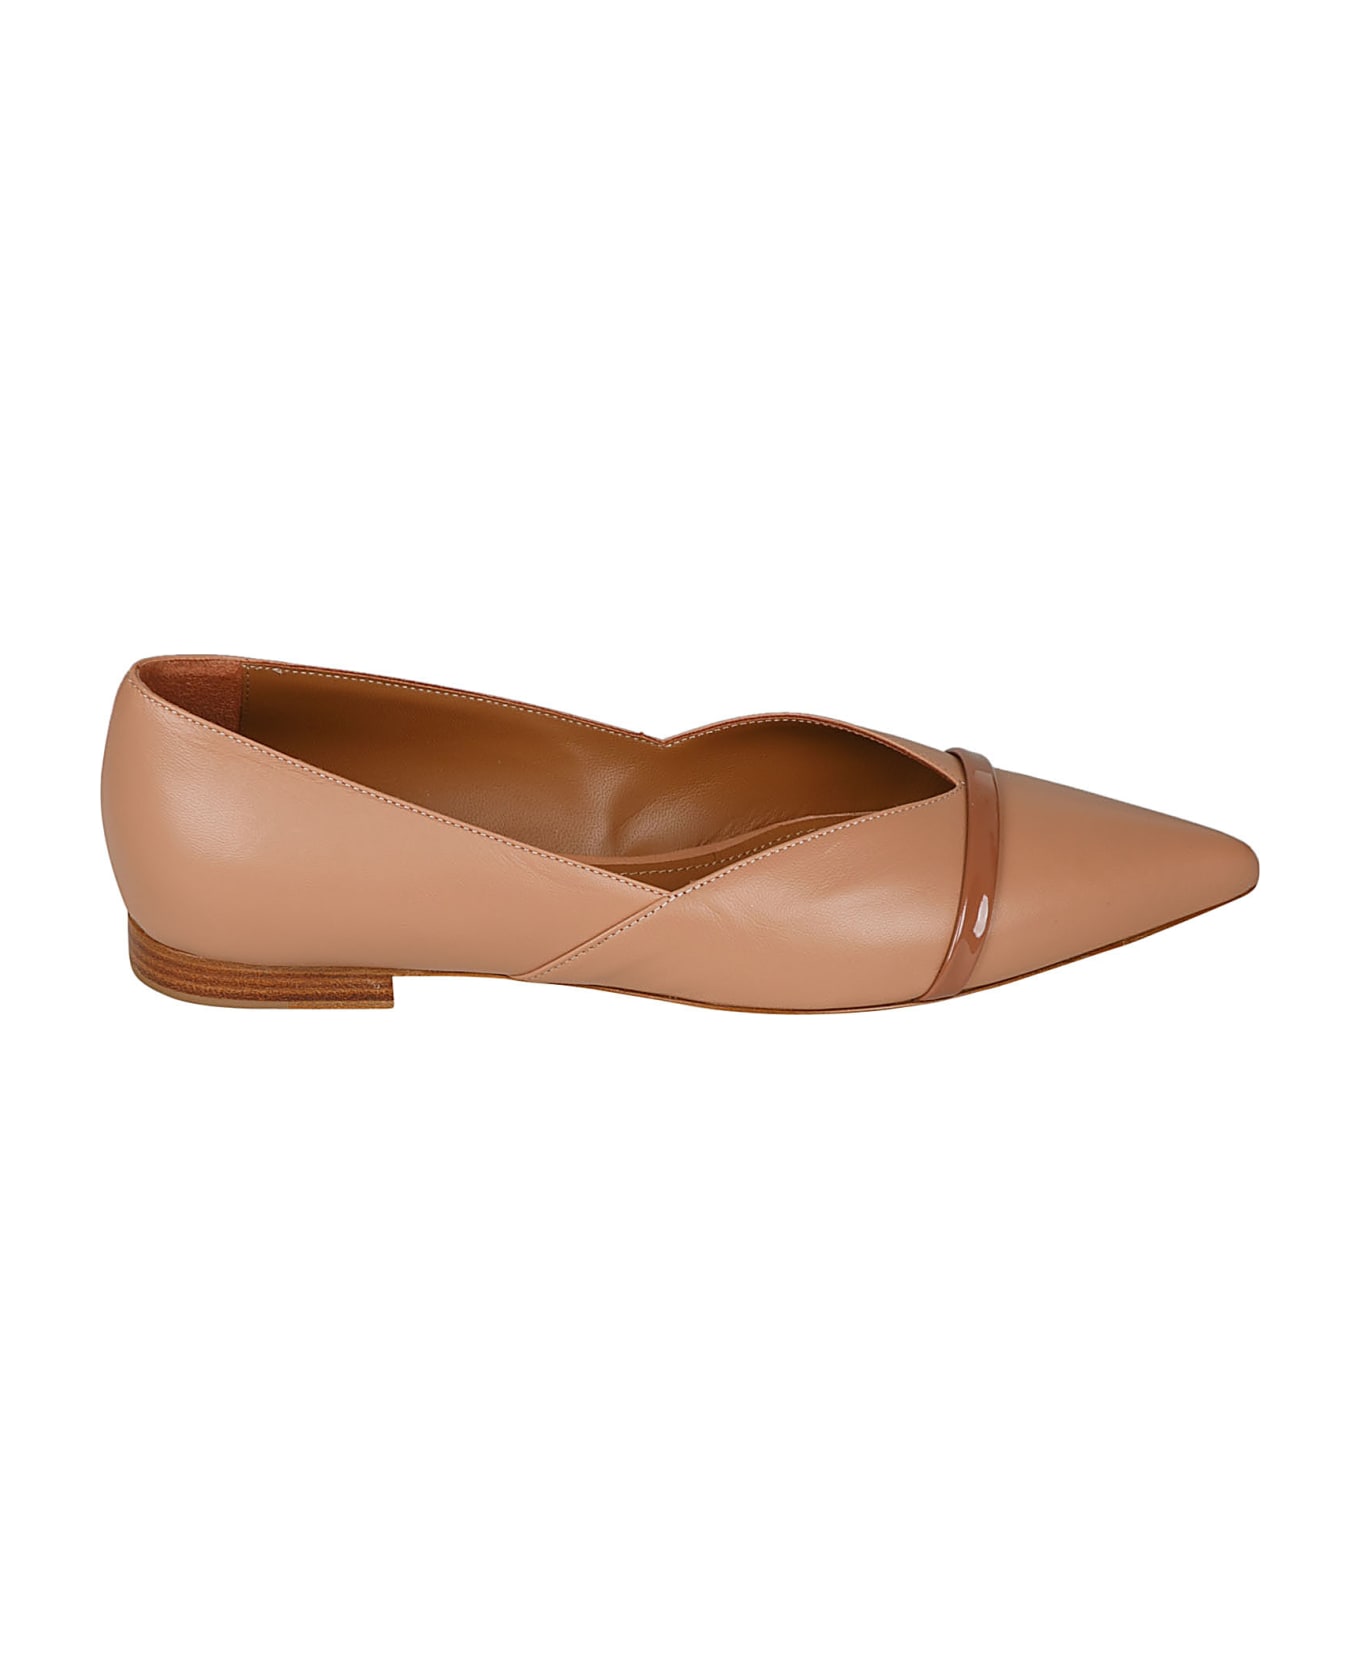 Malone Souliers Pumps - Nude